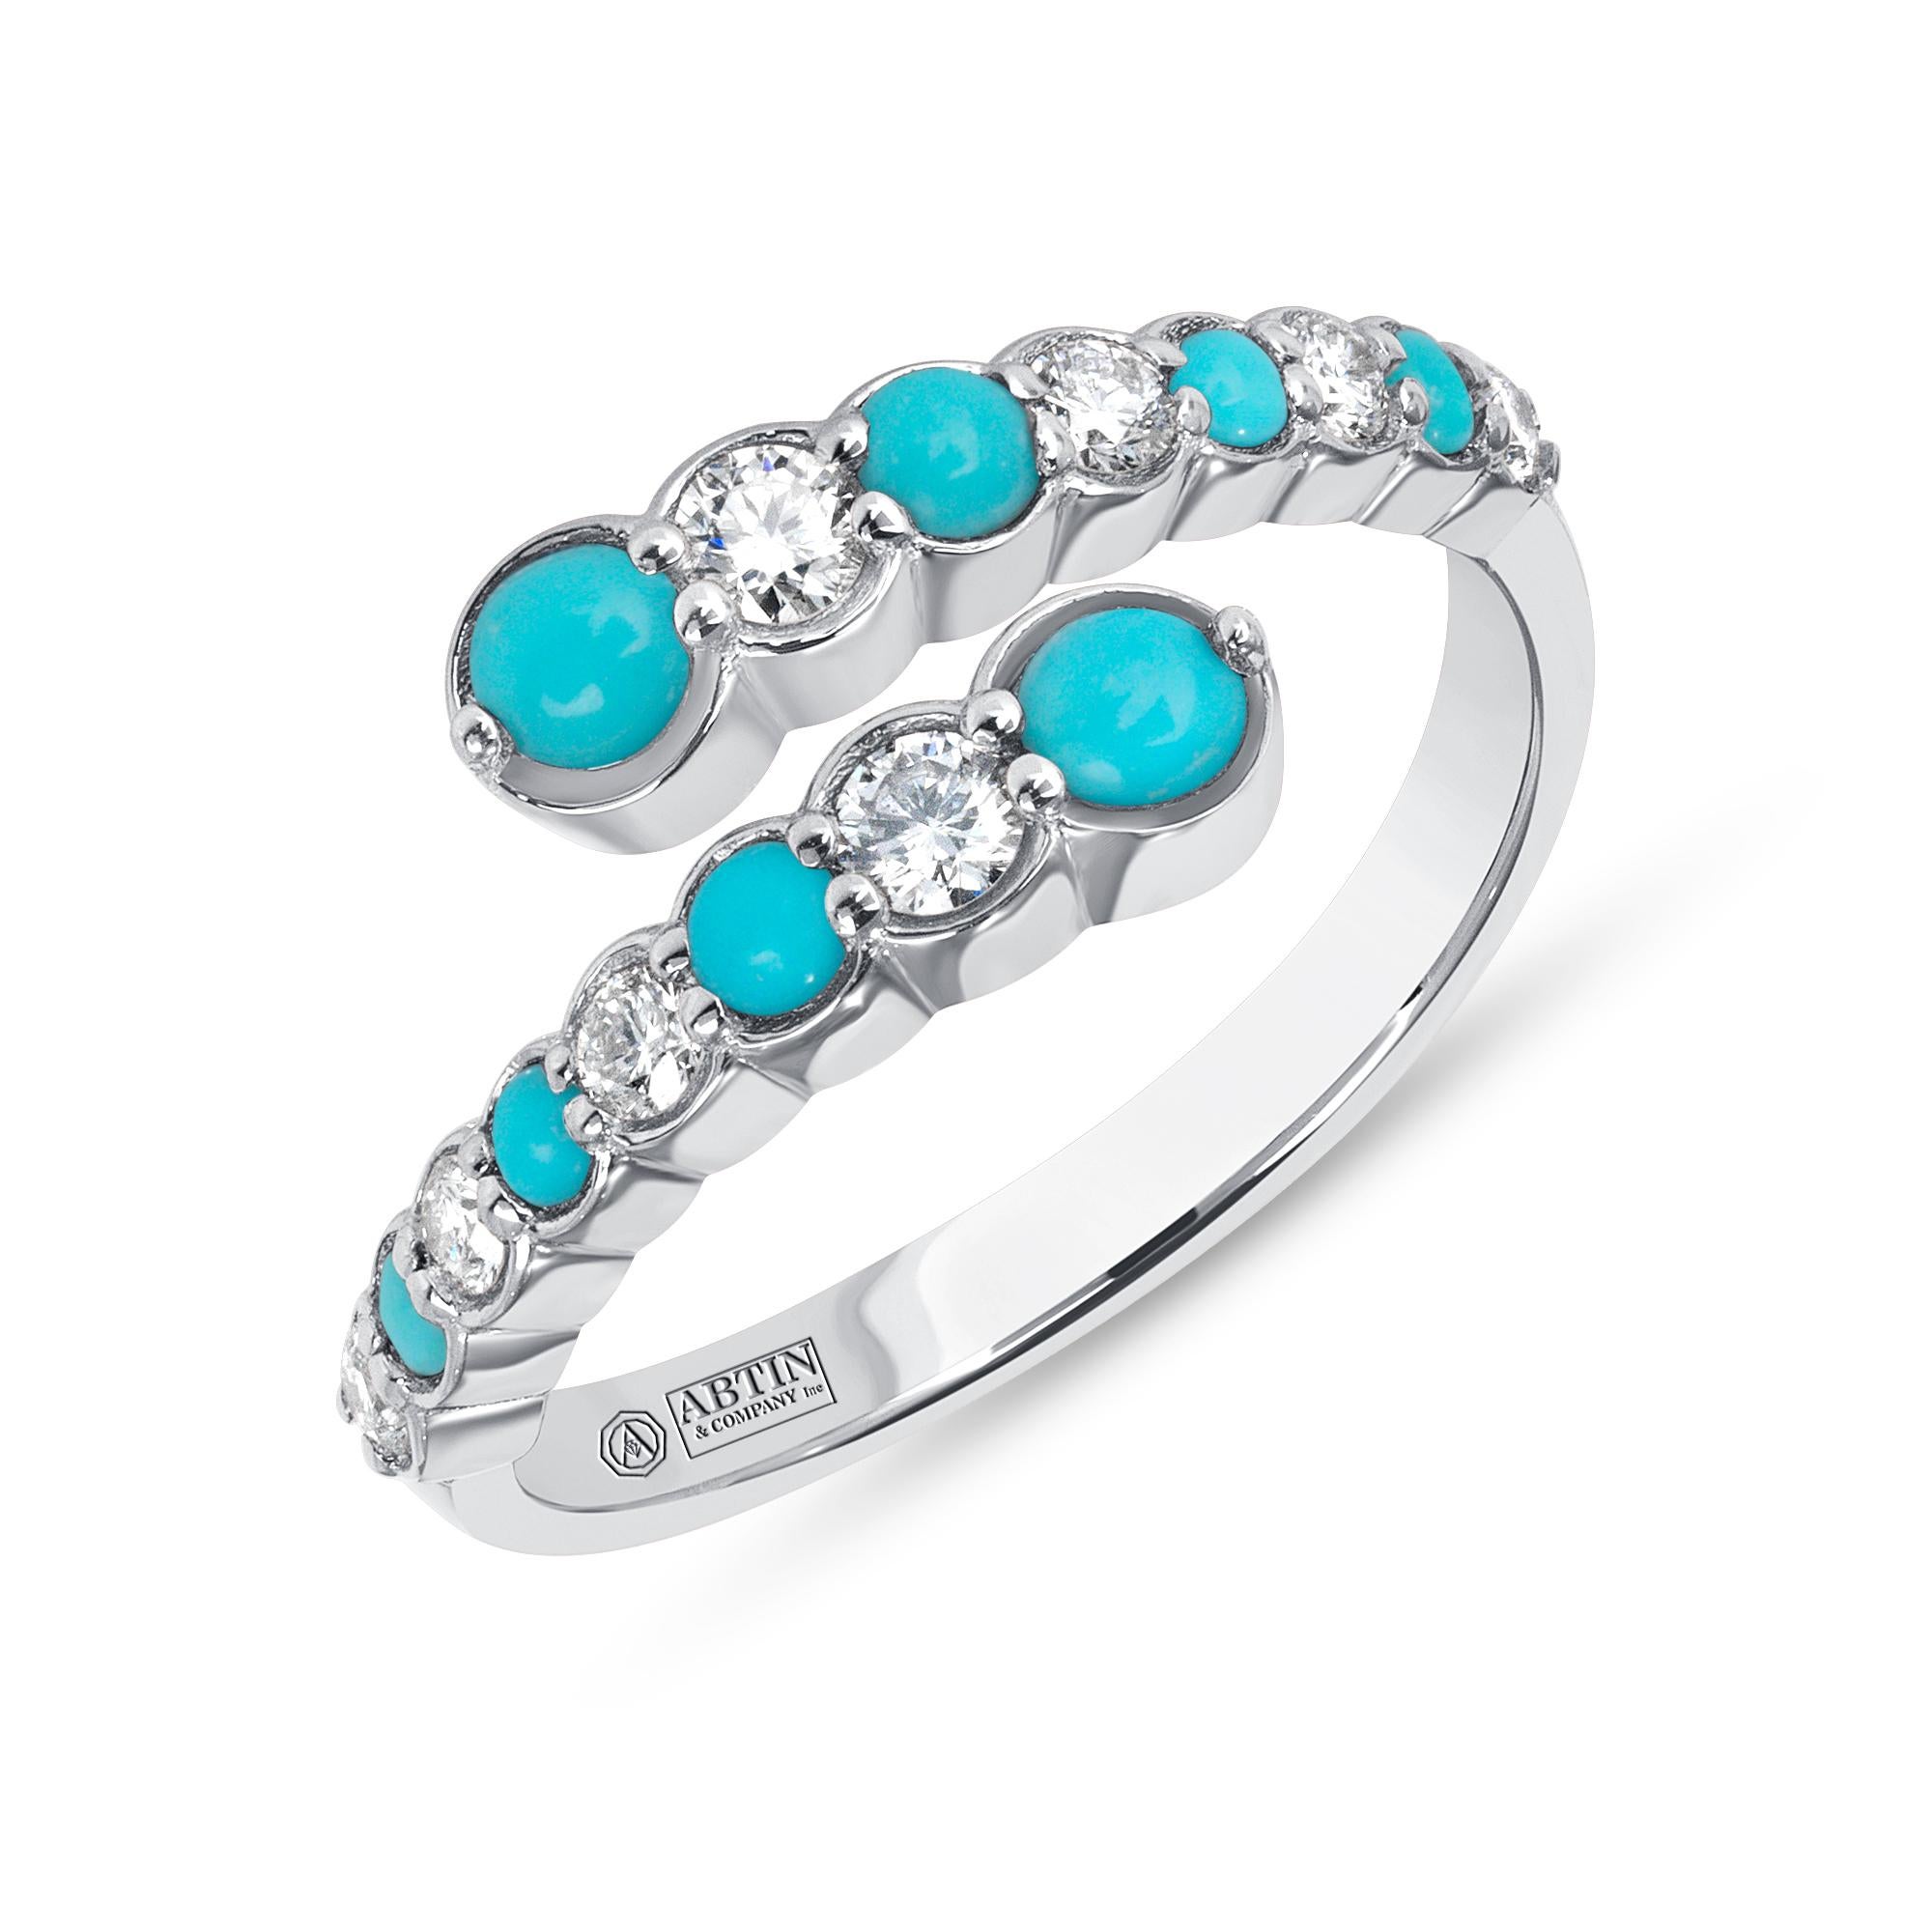 Crafted in 14K gold this ring features a clean and contemporary design. This modern and stylish open bypass alternating ring is set with mesmerizing round-cut diamonds and genuine turquoise gemstones. Stack it with your stacking rings or wear it